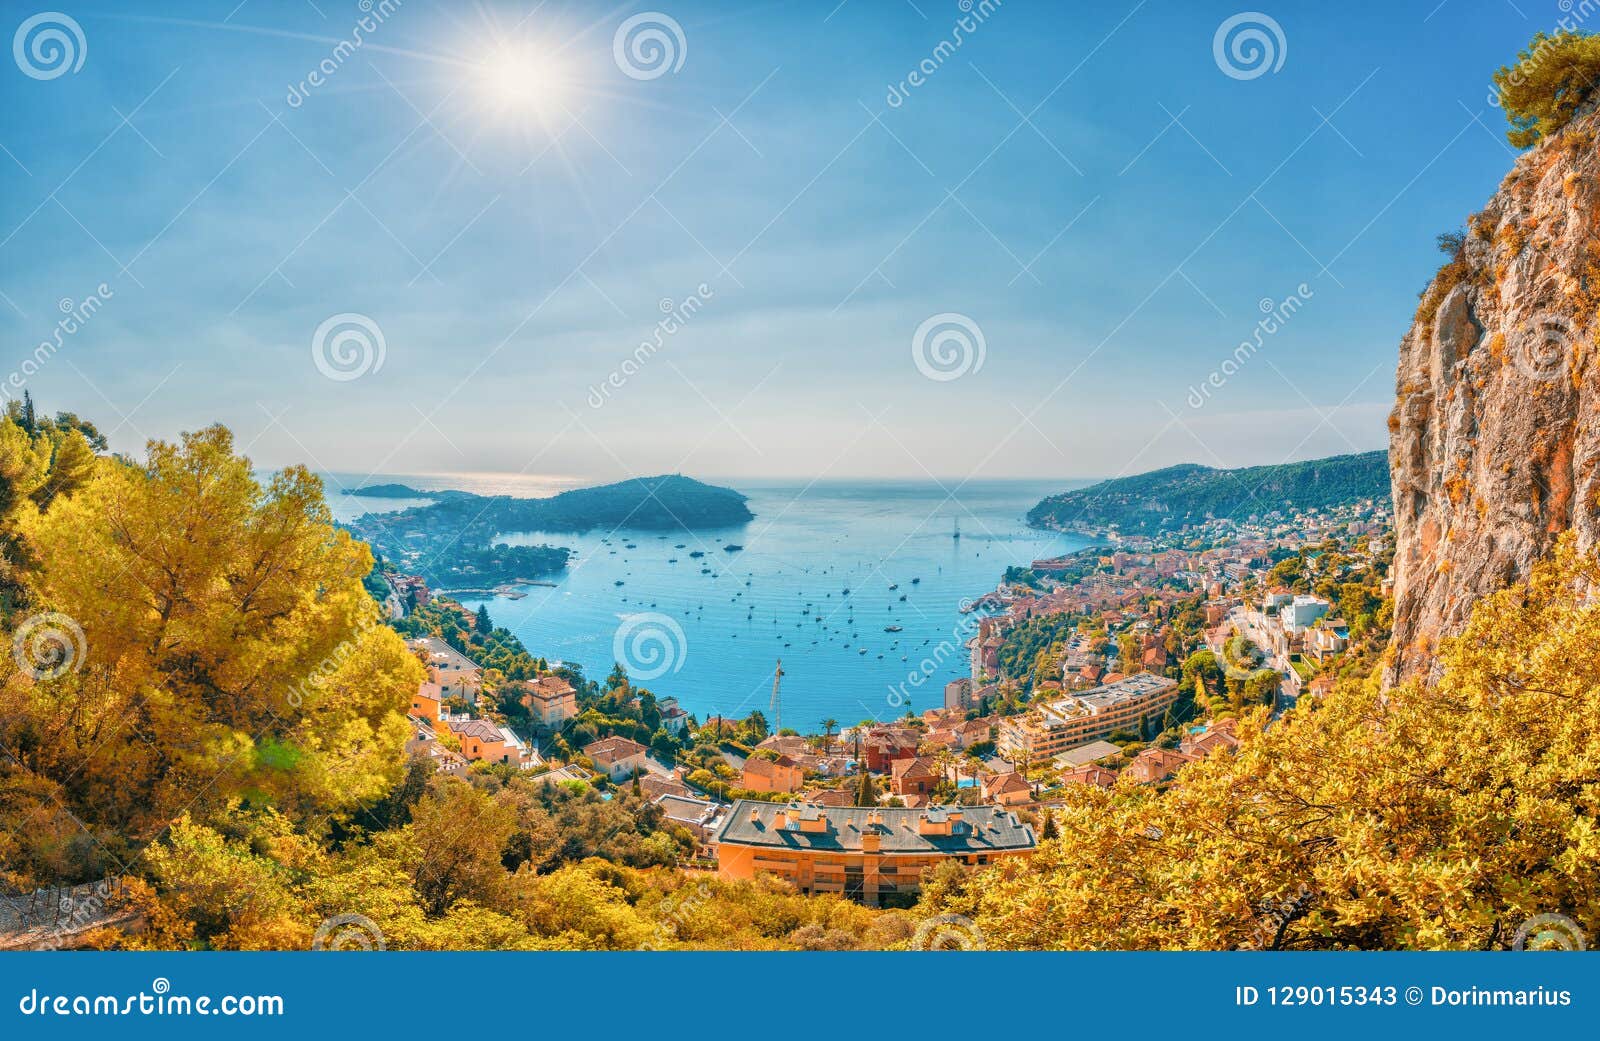 aerial view of french riviera coast with medieval town villefranche sur mer, nice, france